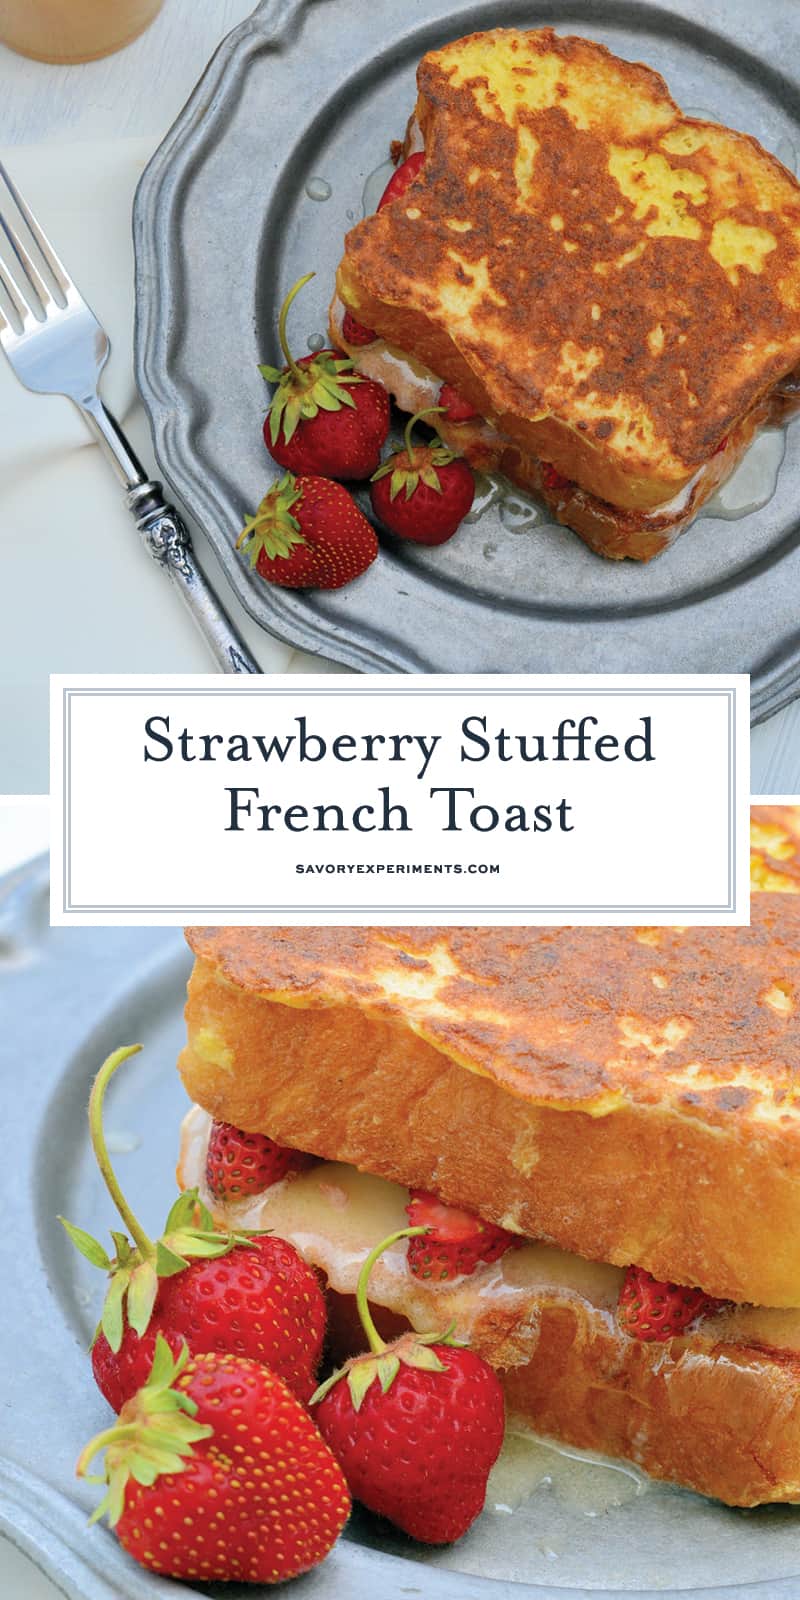 Strawberry Stuffed French Toast - A Decadent French Toast Recipe